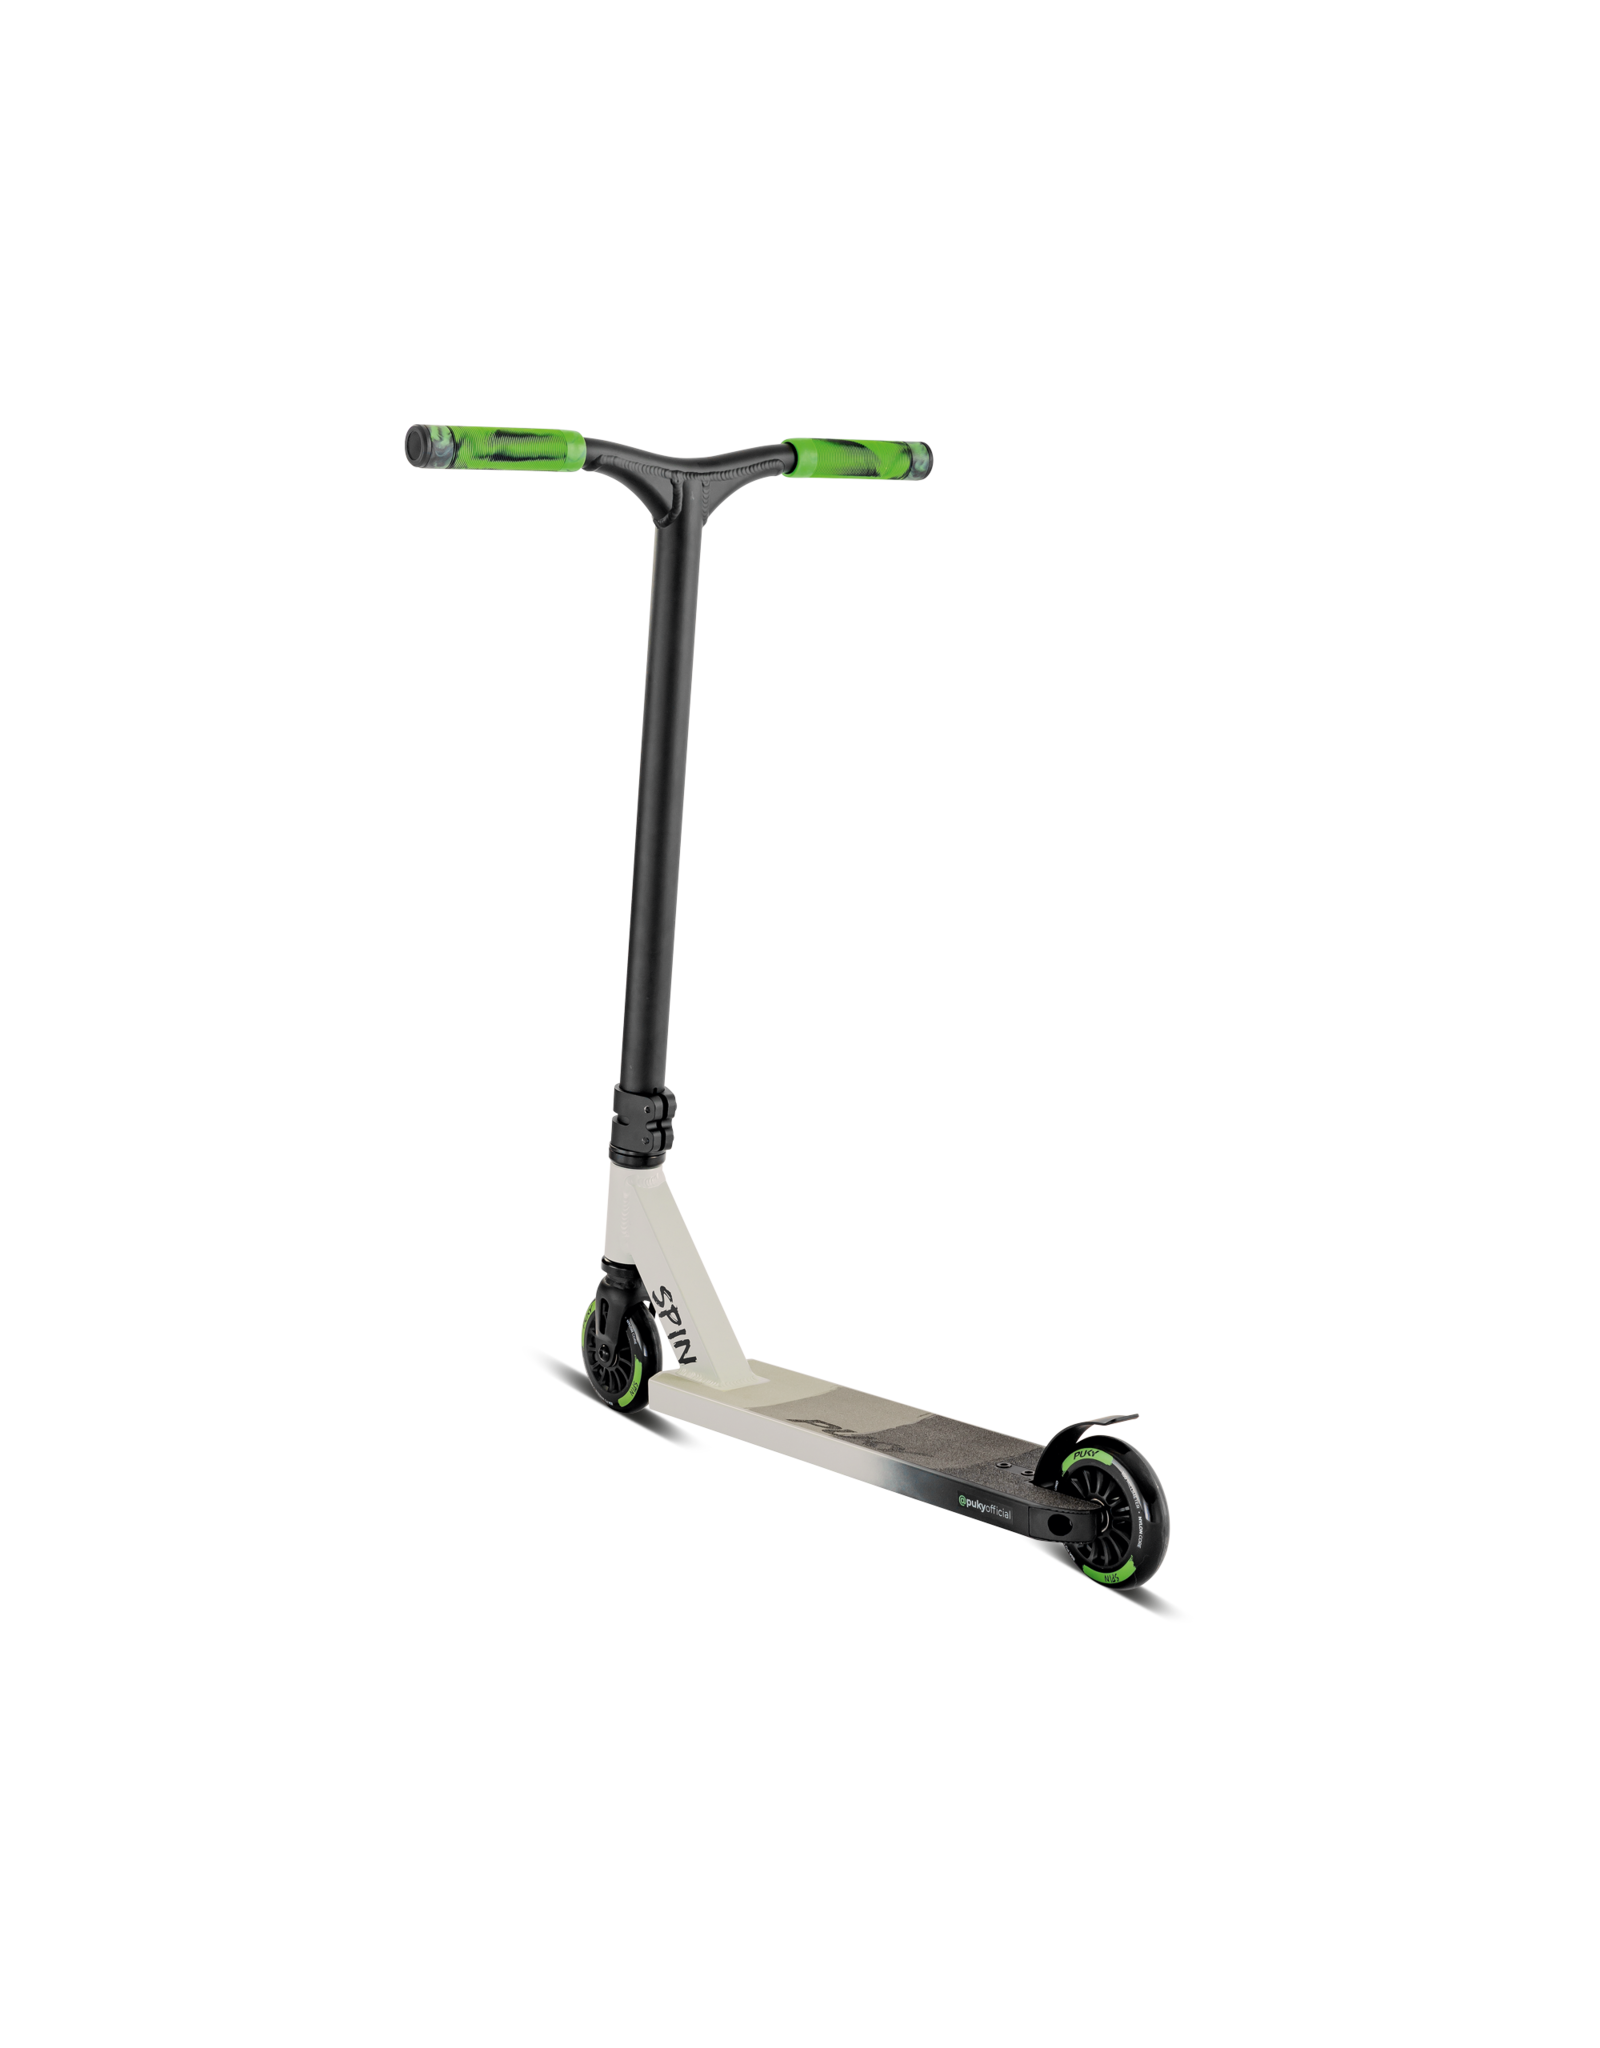 Puky Puky Spin - Weiß - Stunt-Scooter